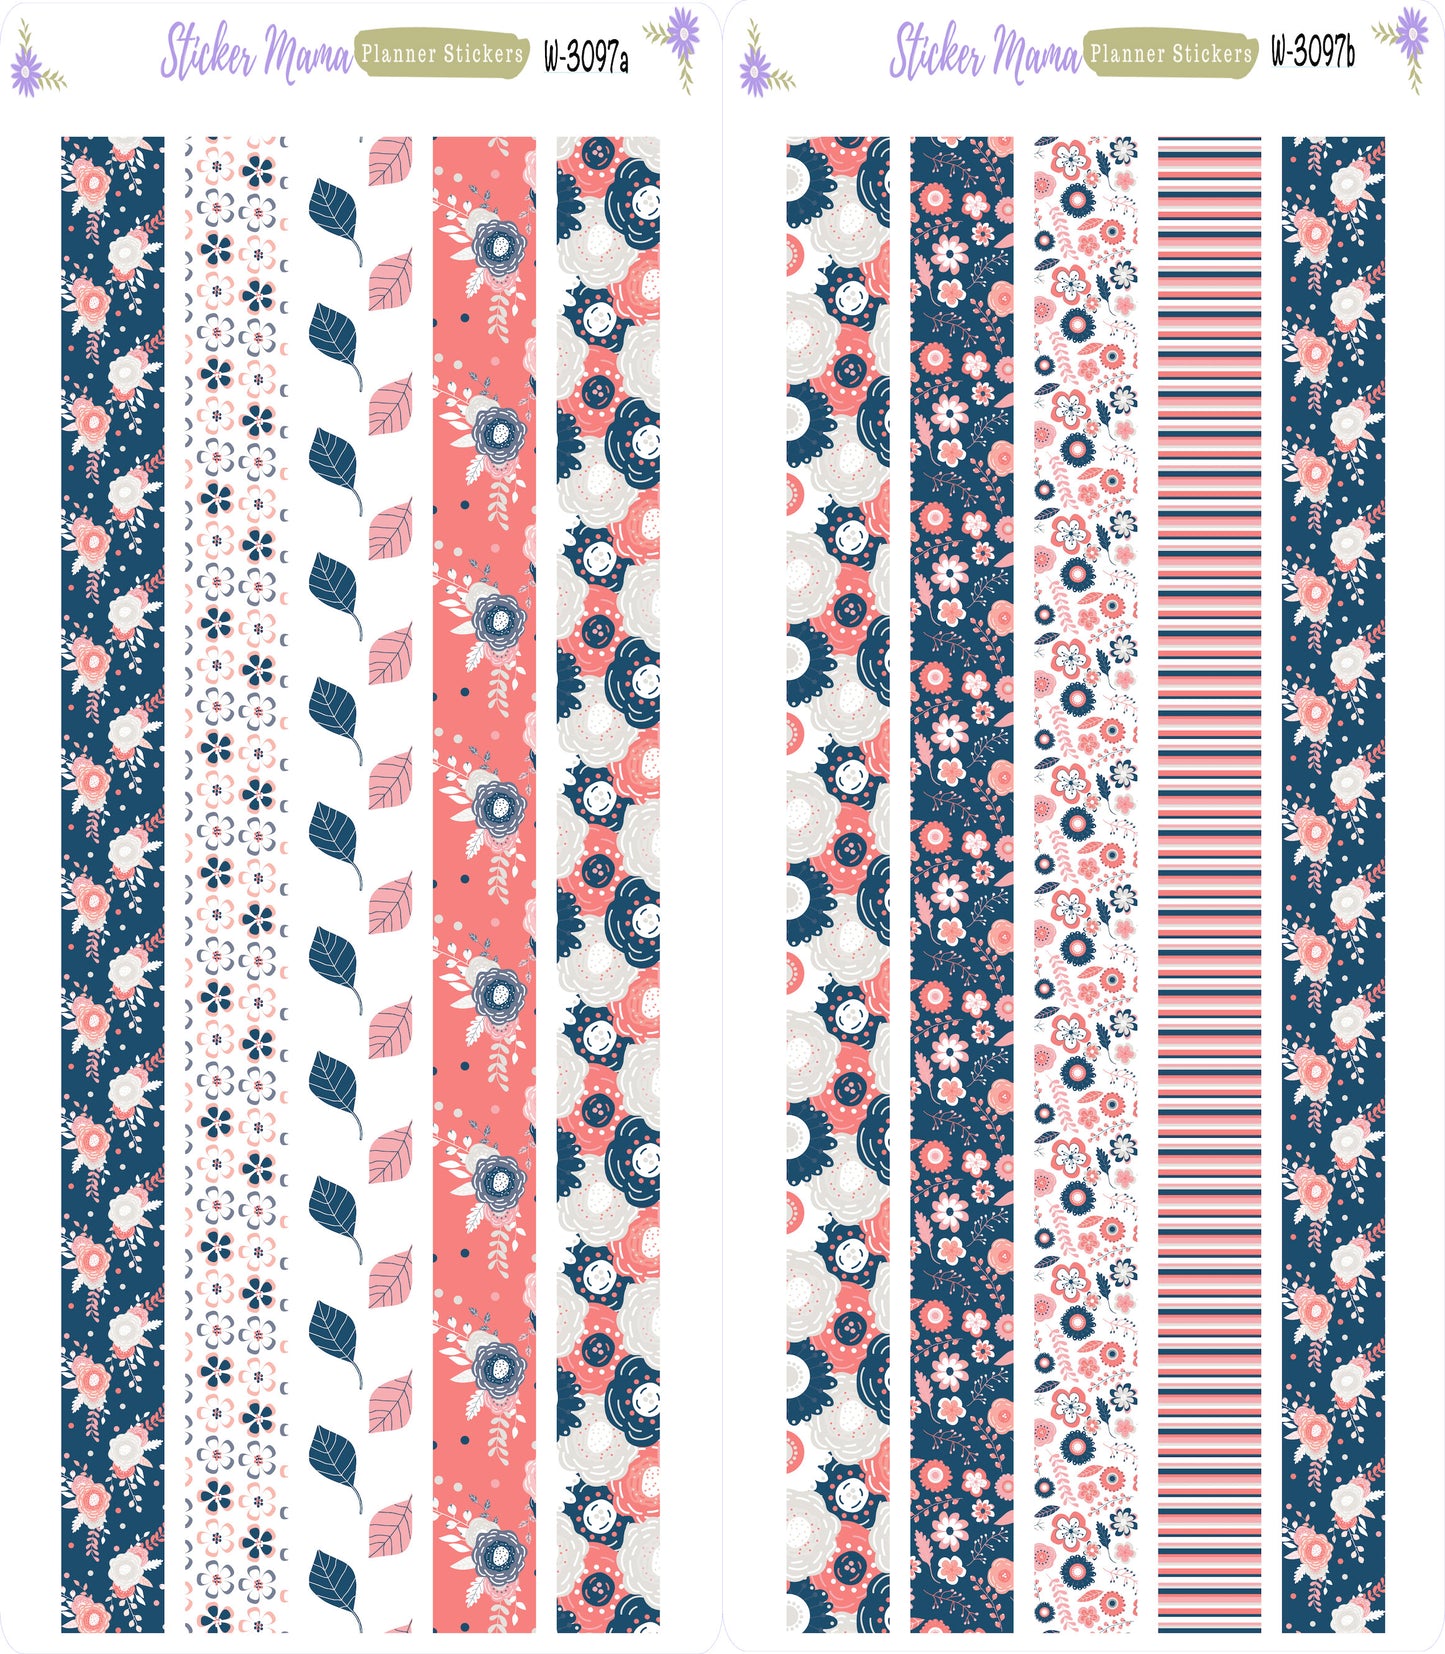 W-3097- Fresh Happiness - Washi Stickers || Planner Stickers || Washi for Planners